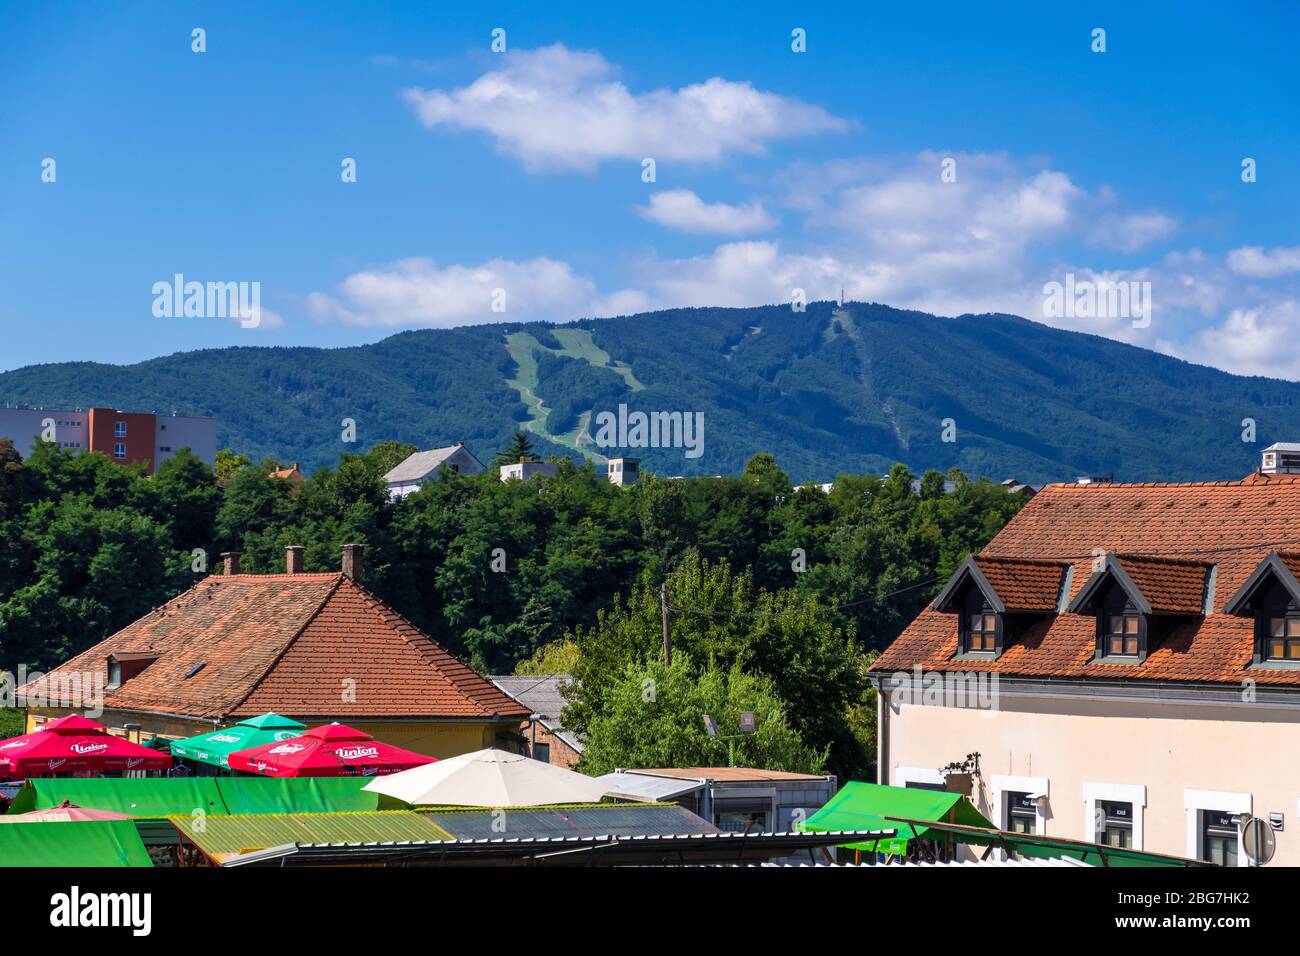 Maribor, Slovenia - August 09, 2019: View of the roofs Old Town and mountain in Maribor, Slovenia, Eastern Alps Stock Photo